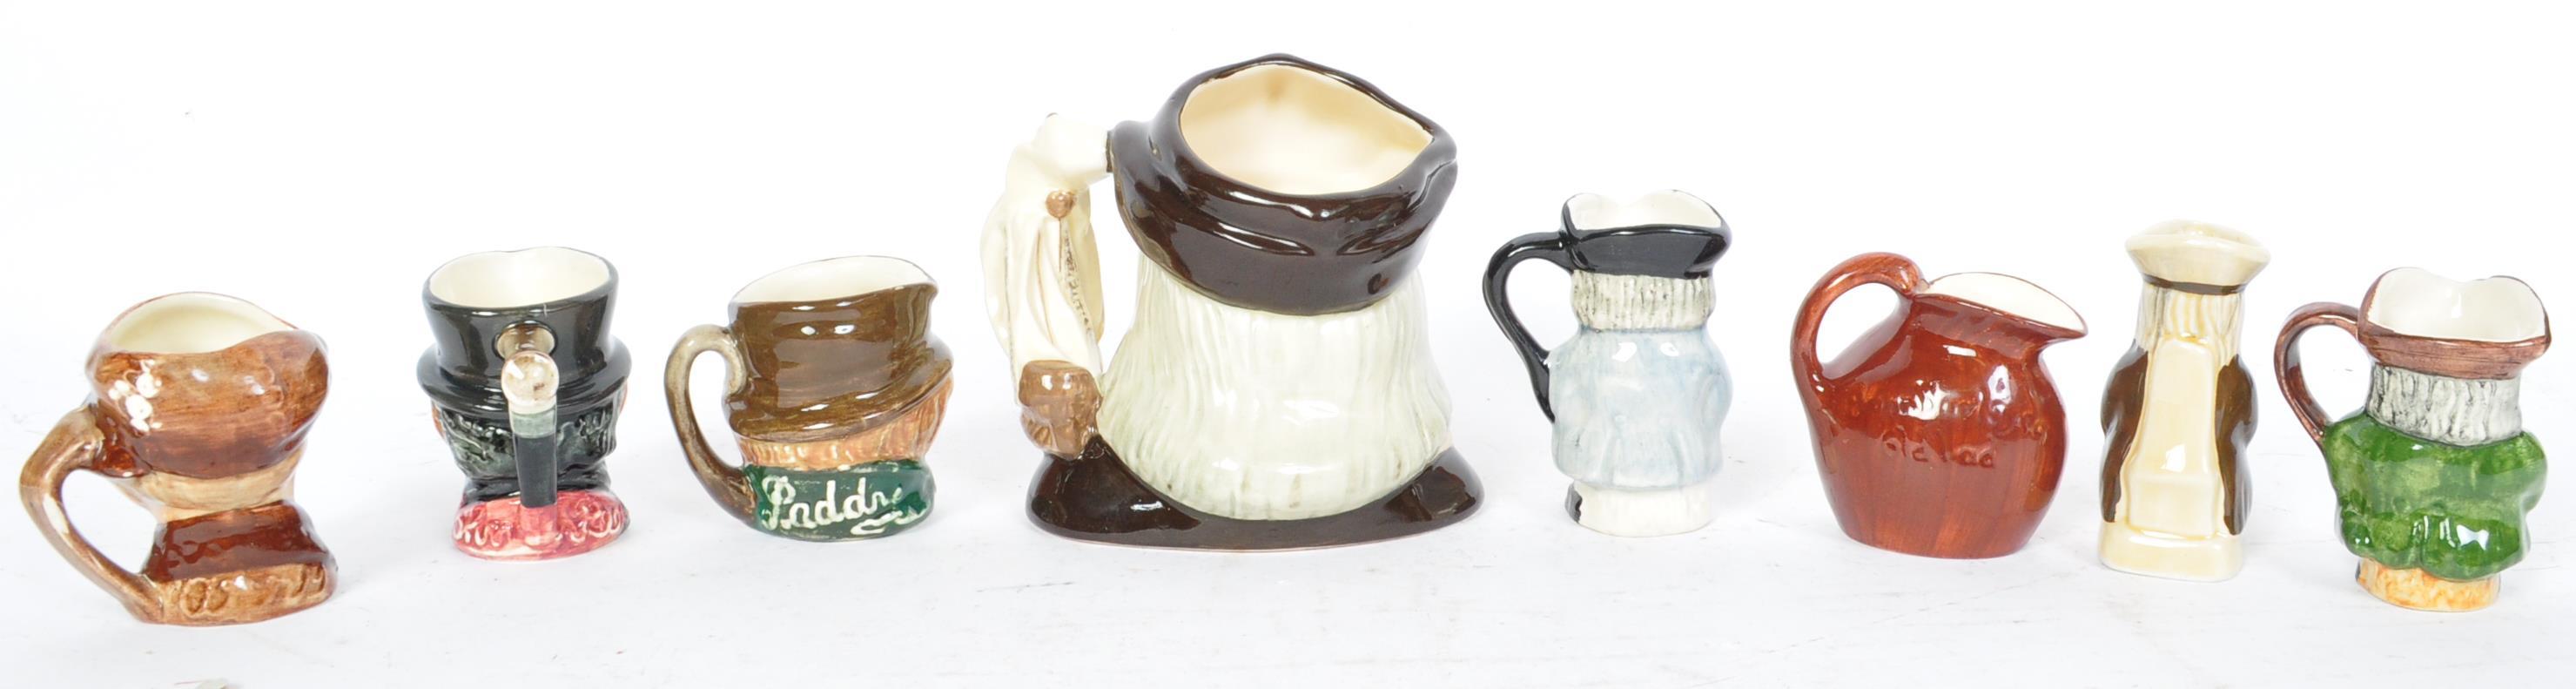 A COLLECTION OF EIGHT VINTAGE CERAMIC MINIATURE TOBY JUGS - Image 5 of 8